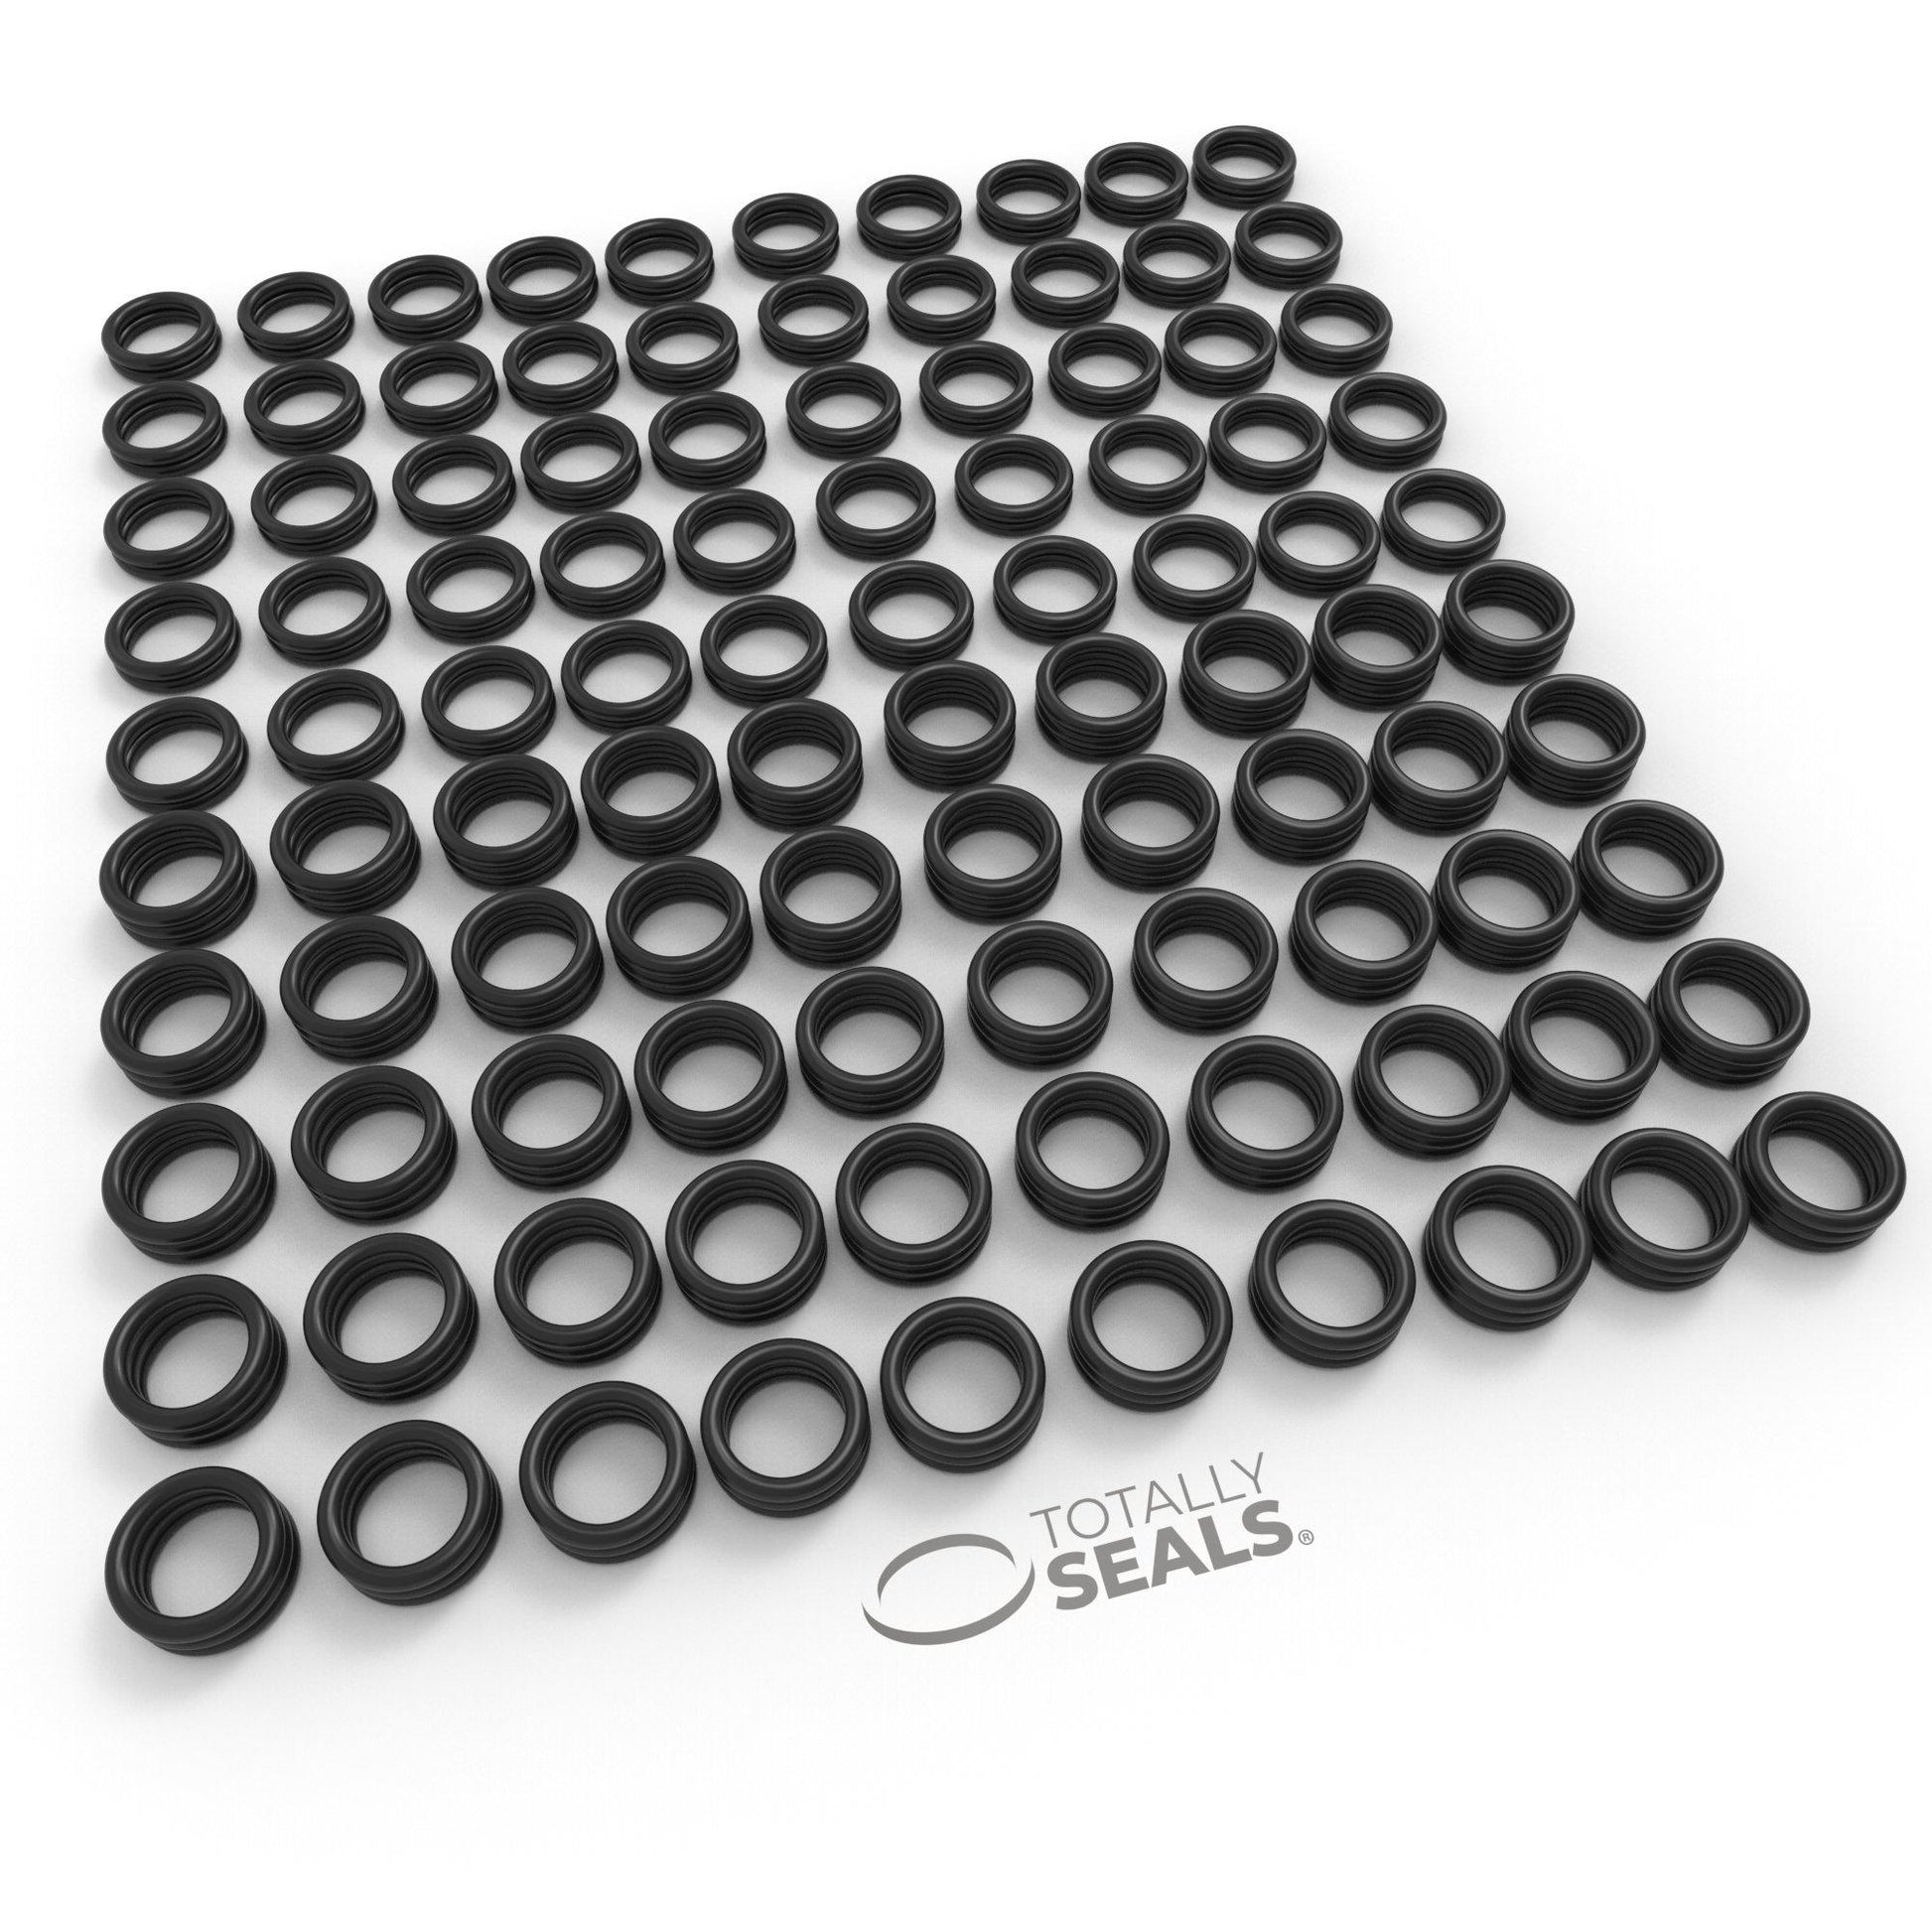 8mm x 2mm (12mm OD) Nitrile O-Rings - Totally Seals®